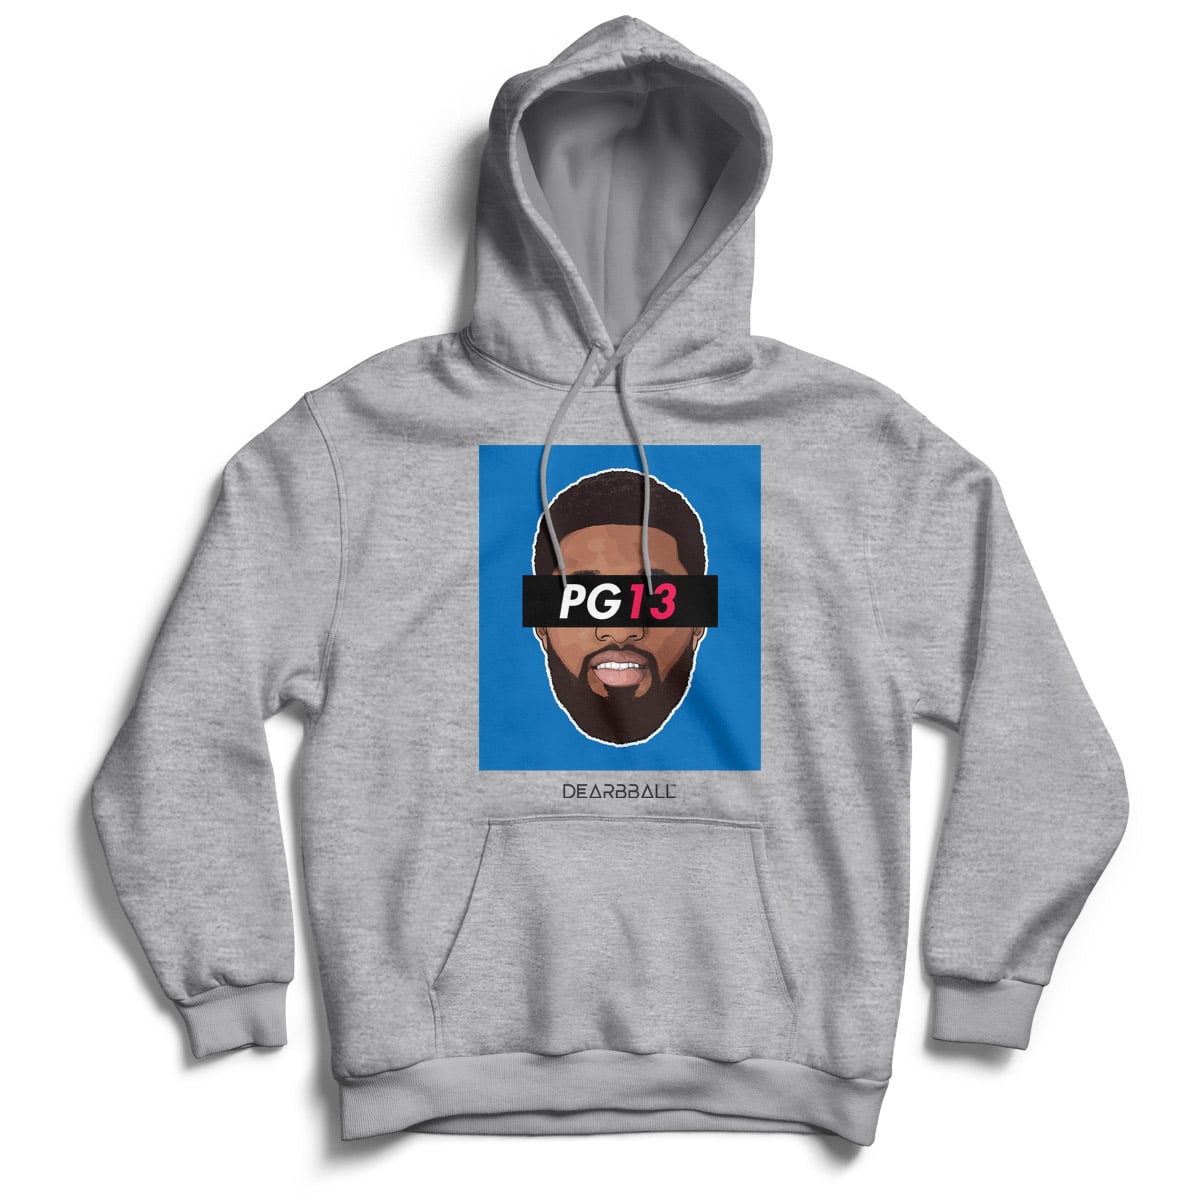 DearBBall Hoodie - PG13 Blue Edition